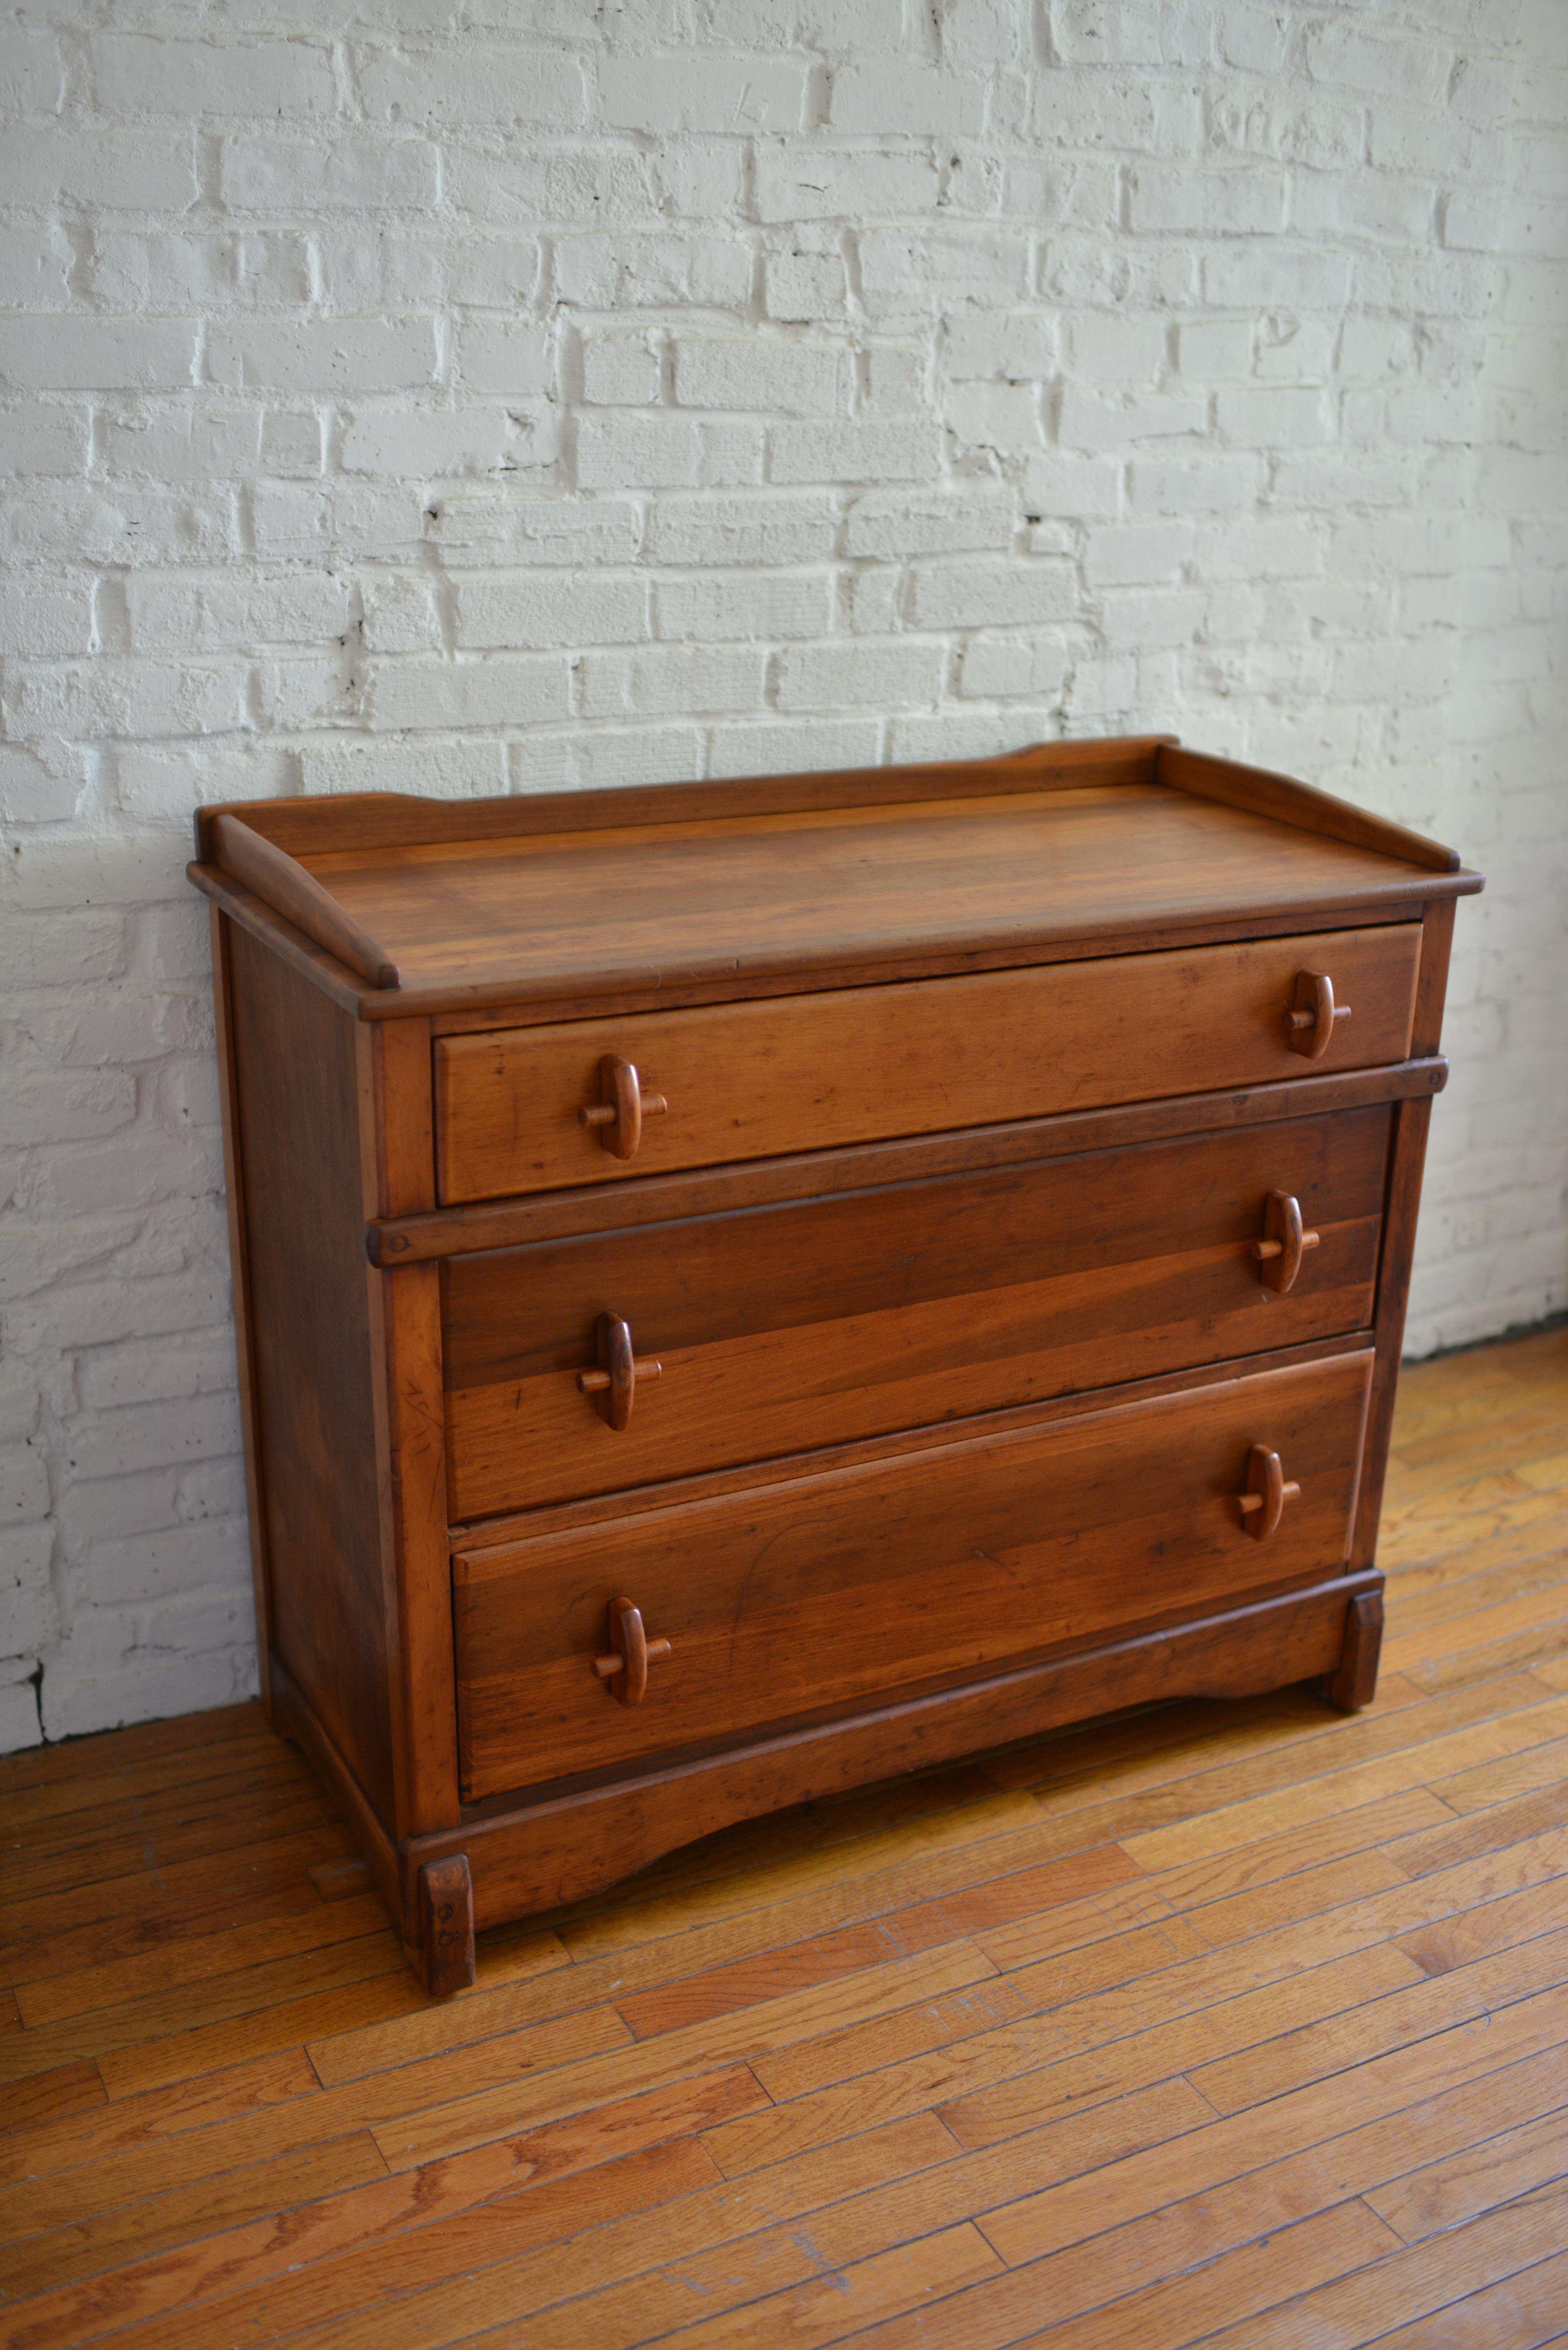 Wood Antique Chest of Drawers with Cross Handle Pulls